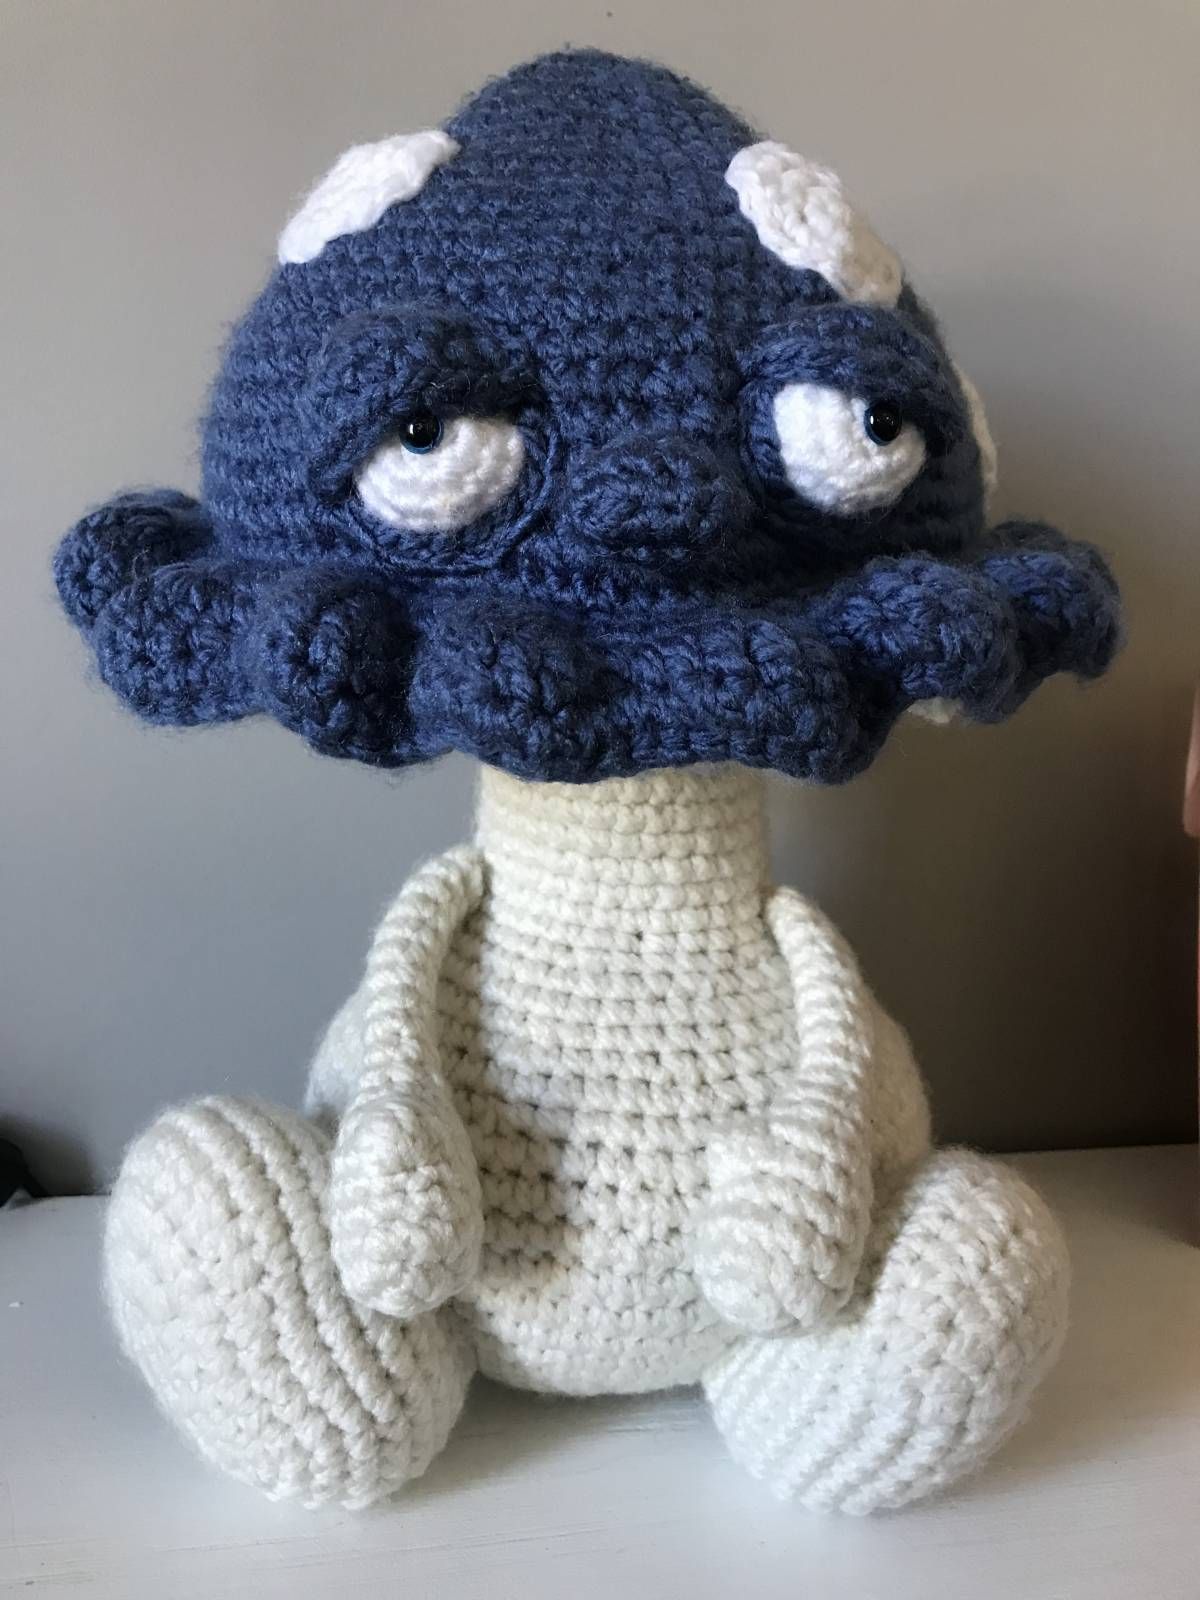 Amigurumi Crochet Mushroom Pattern Review by Deanne for Cottontail and Whiskers